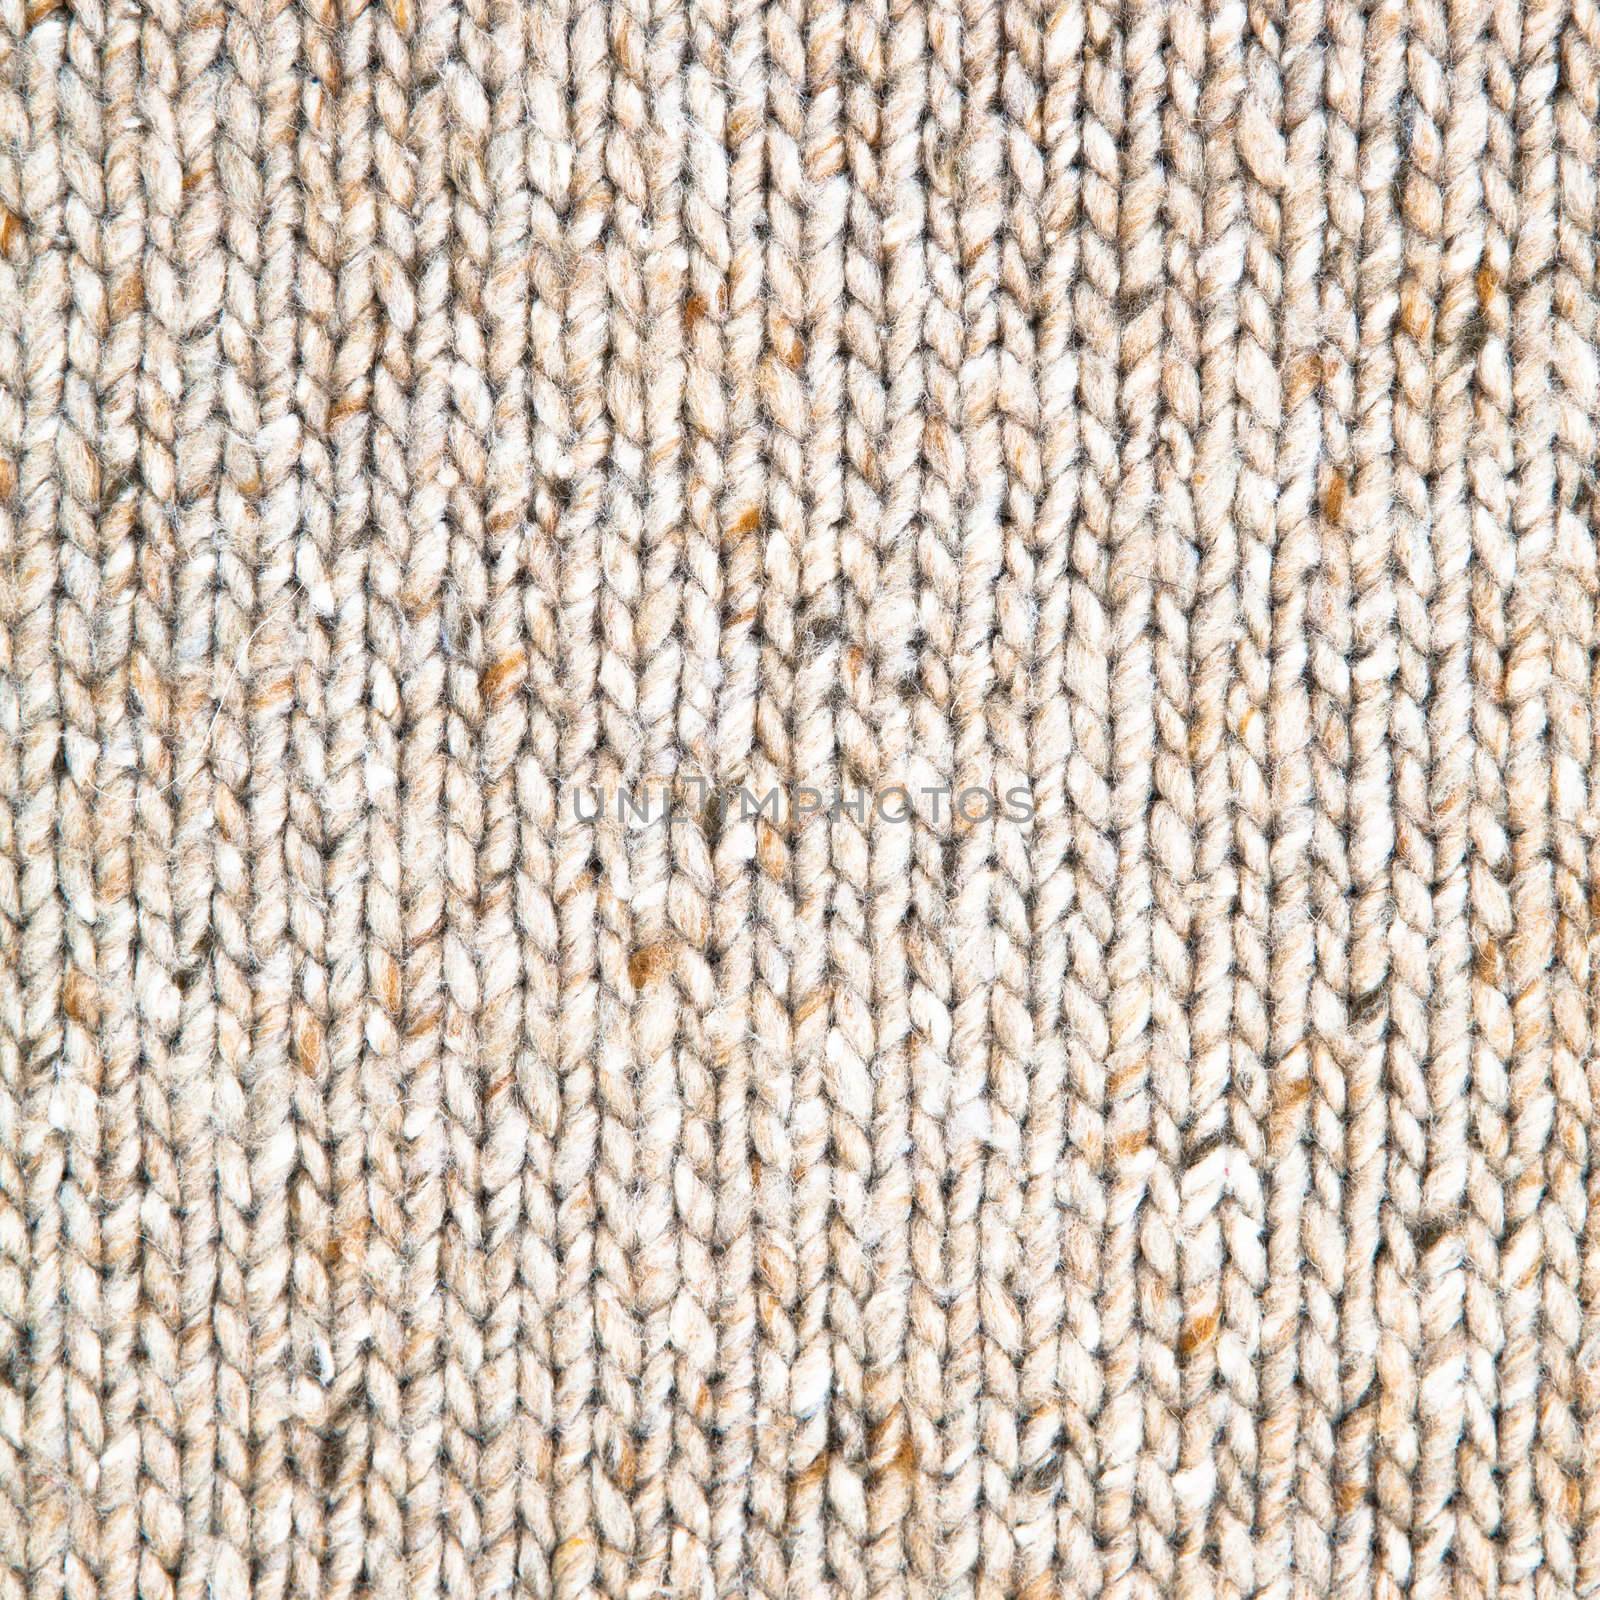 Detail of woven wool as a background image